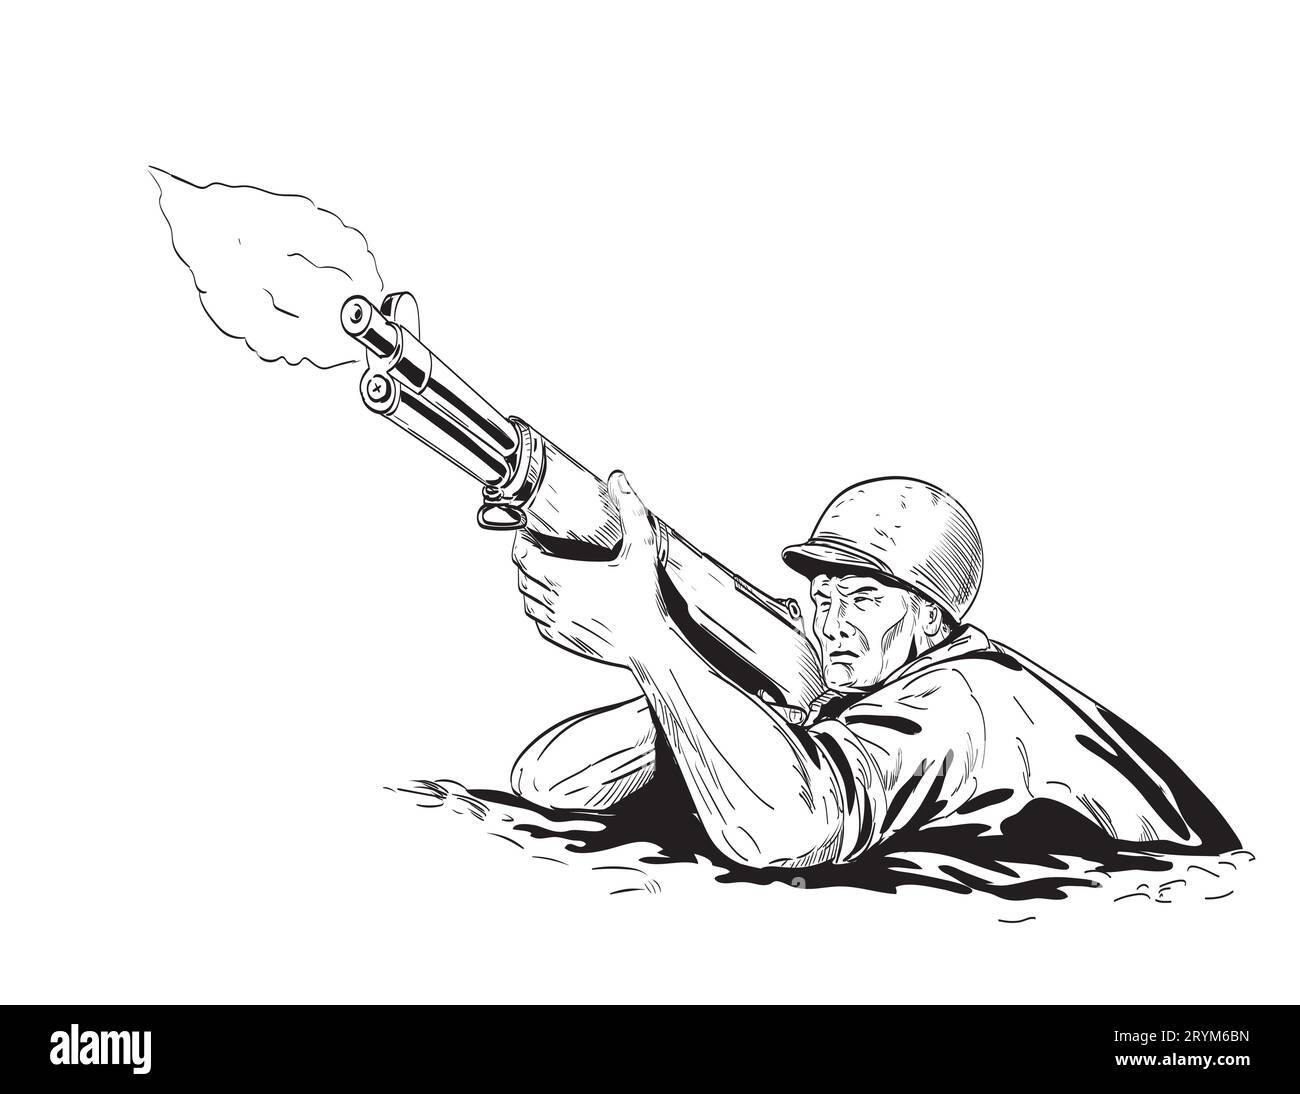 World War Two American GI Soldier Aiming Firing Rifle Front Low Angle View Comics Style Drawing Stock Photo